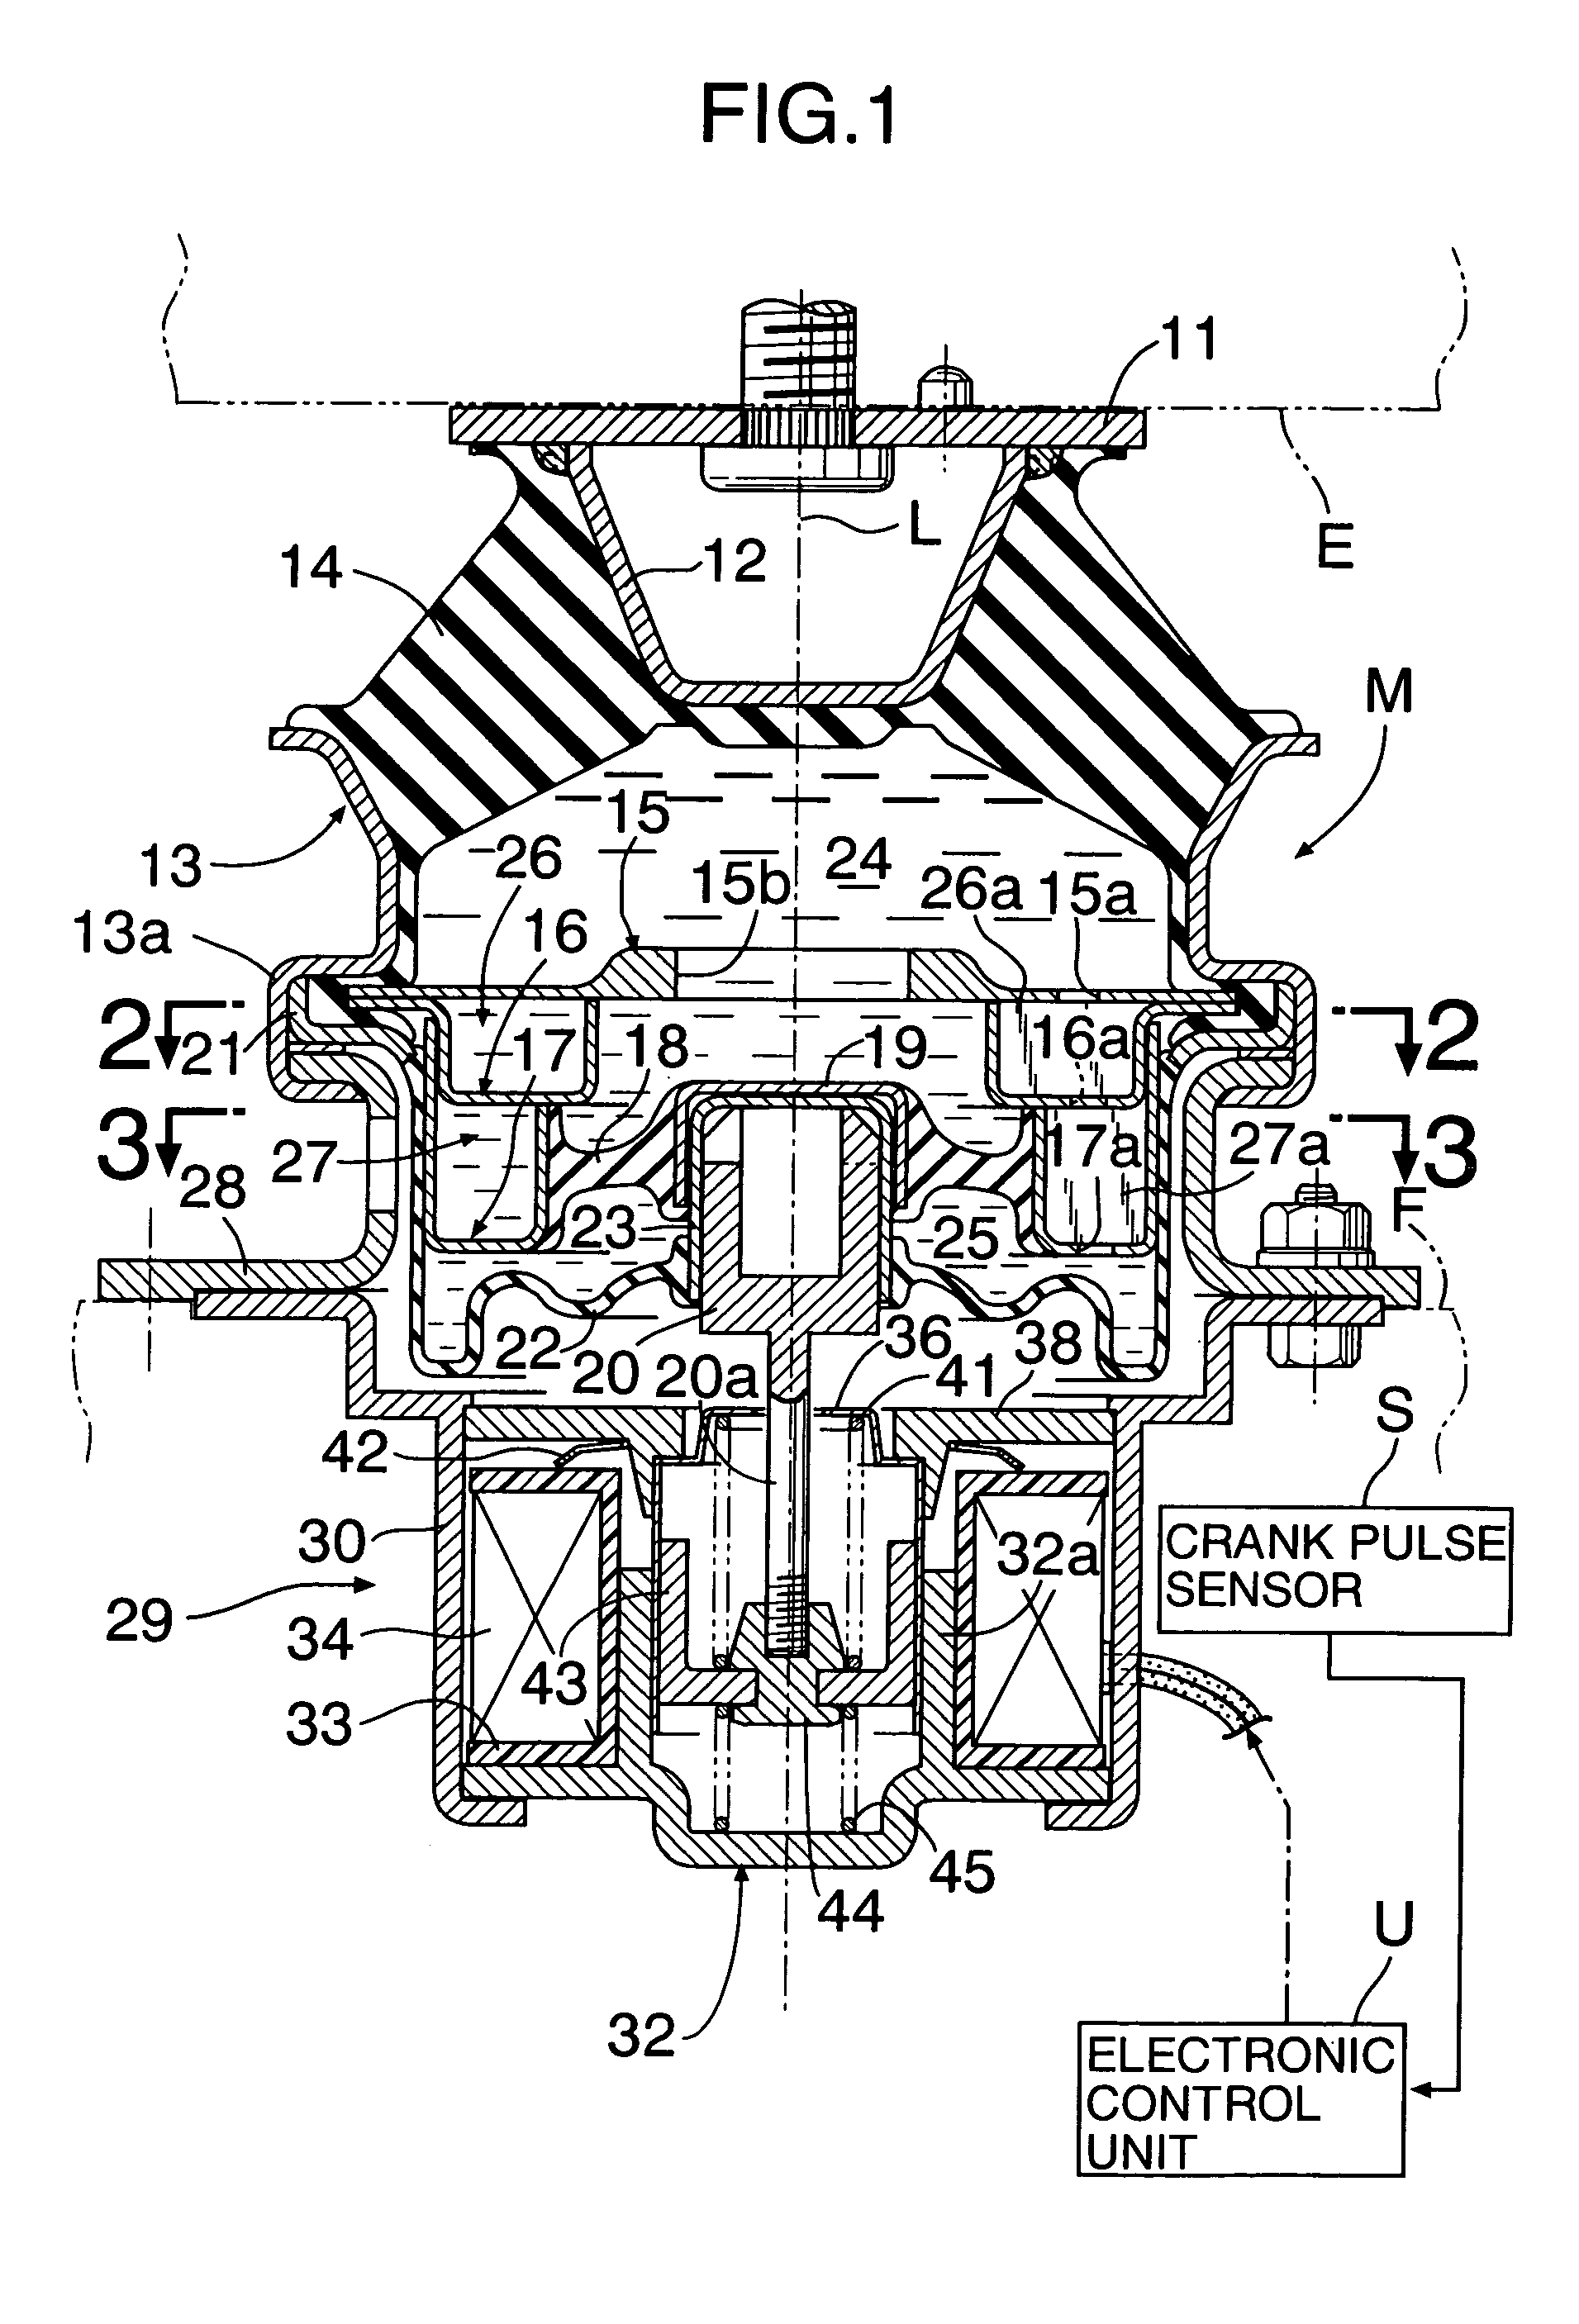 Anti-vibration support system for engine